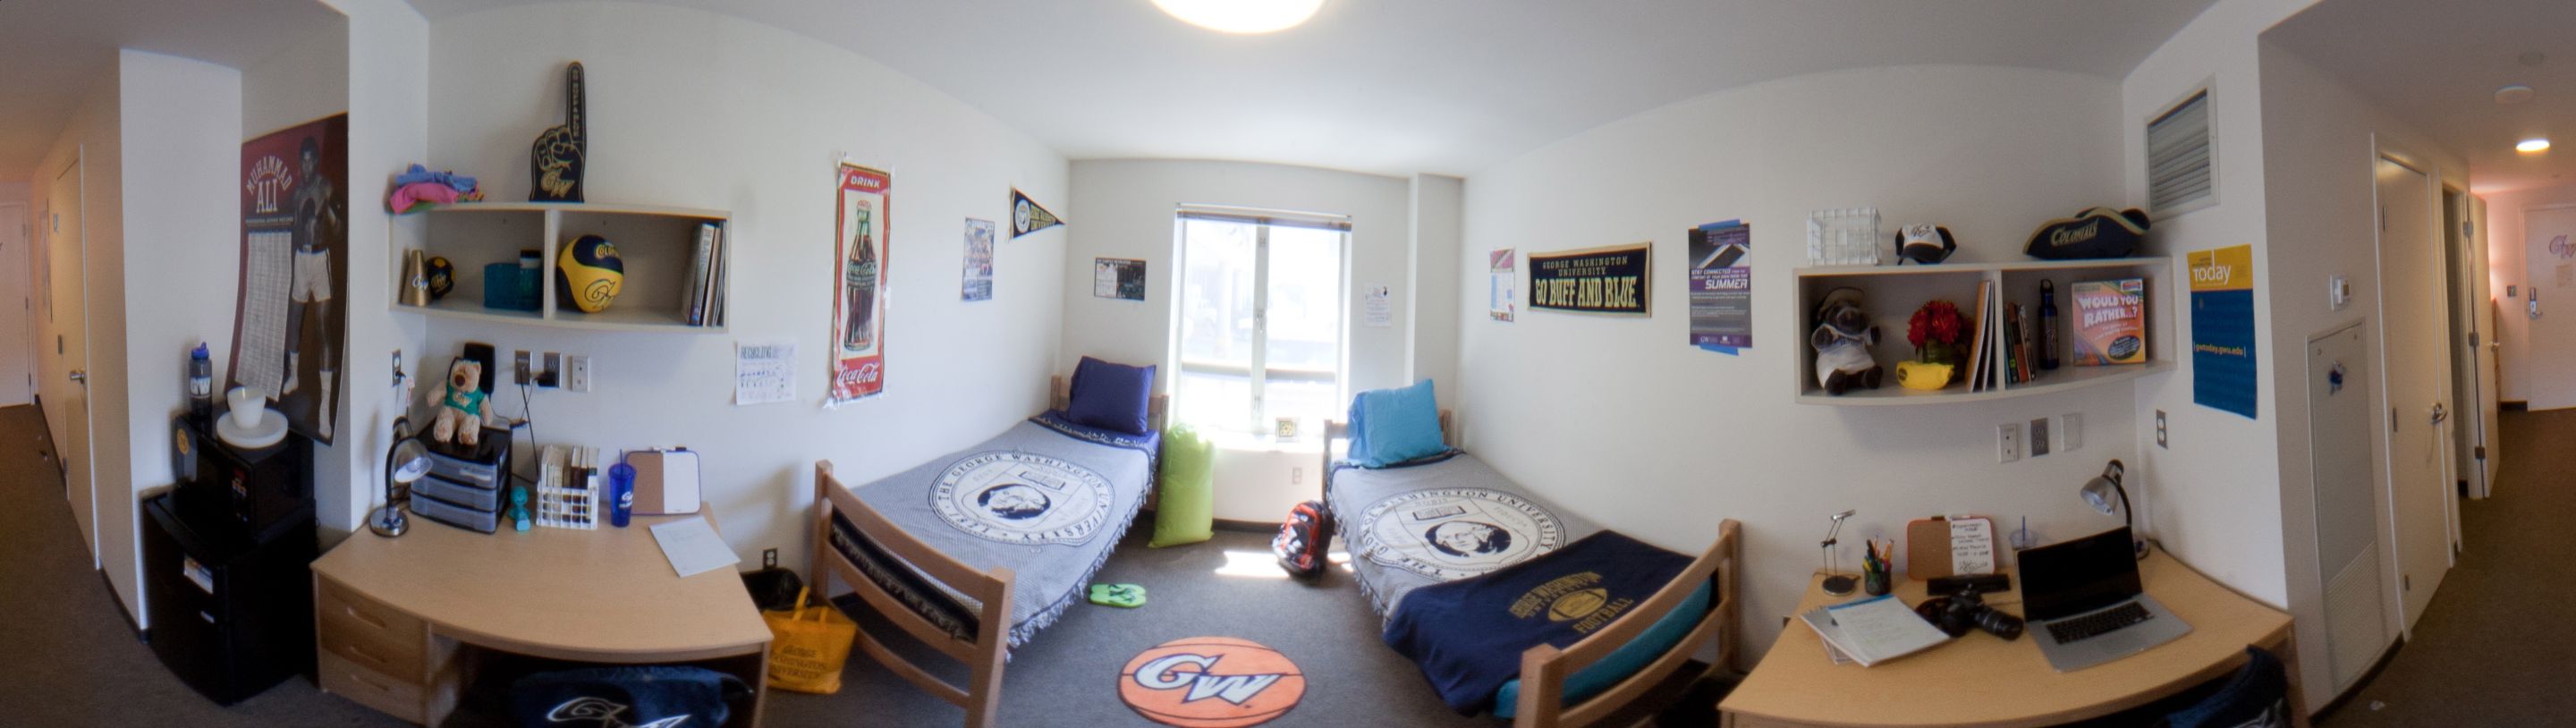 A panoramic view of a double residence hall room.